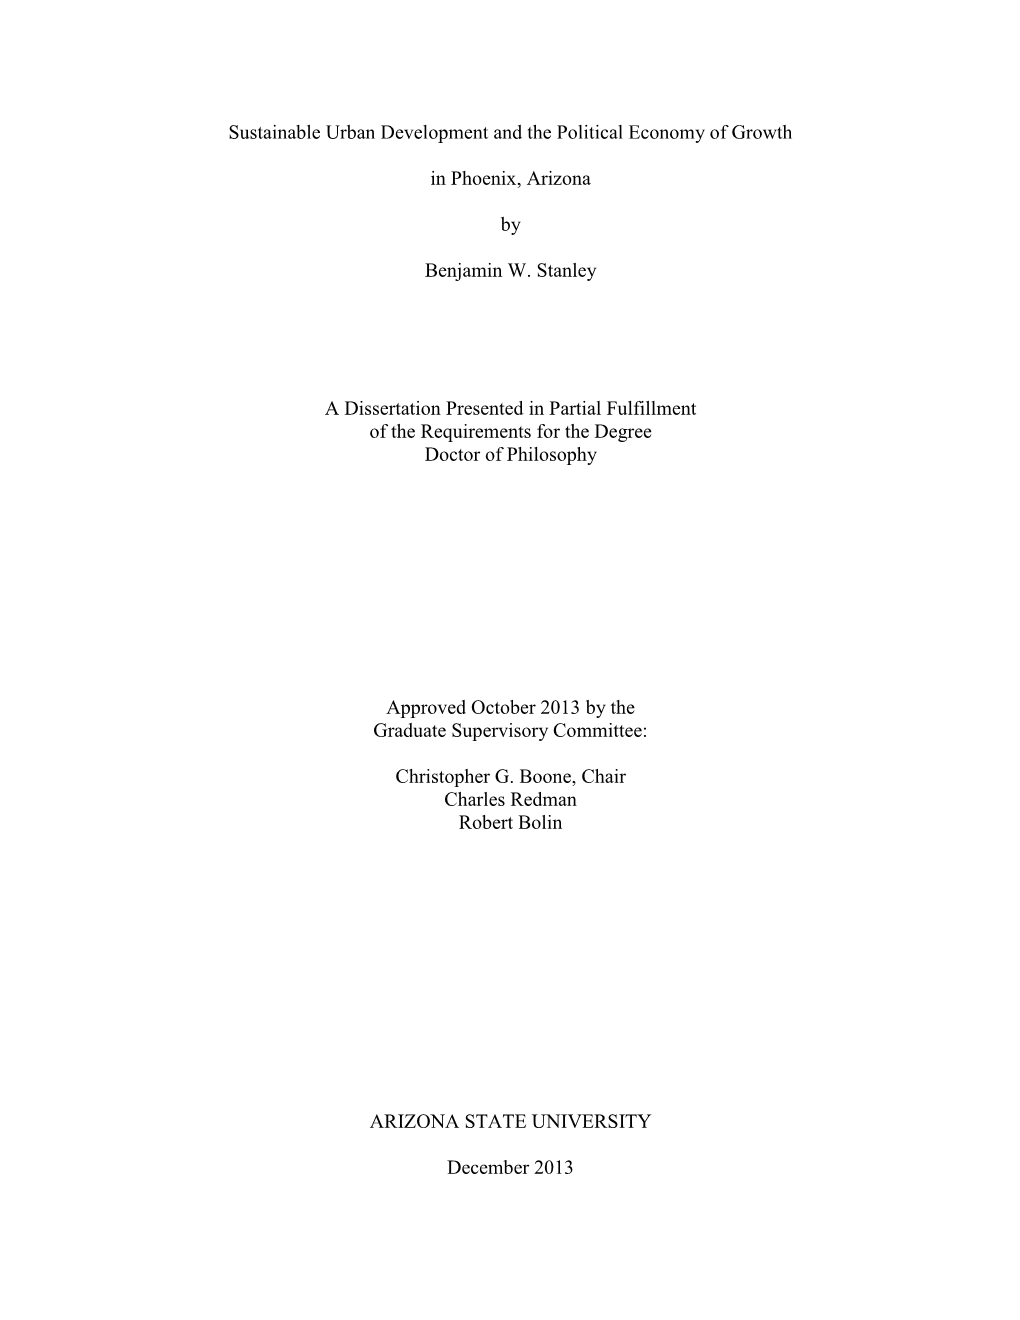 Sustainable Urban Development and the Political Economy of Growth in Phoenix, Arizona by Benjamin W. Stanley a Dissertation Pr